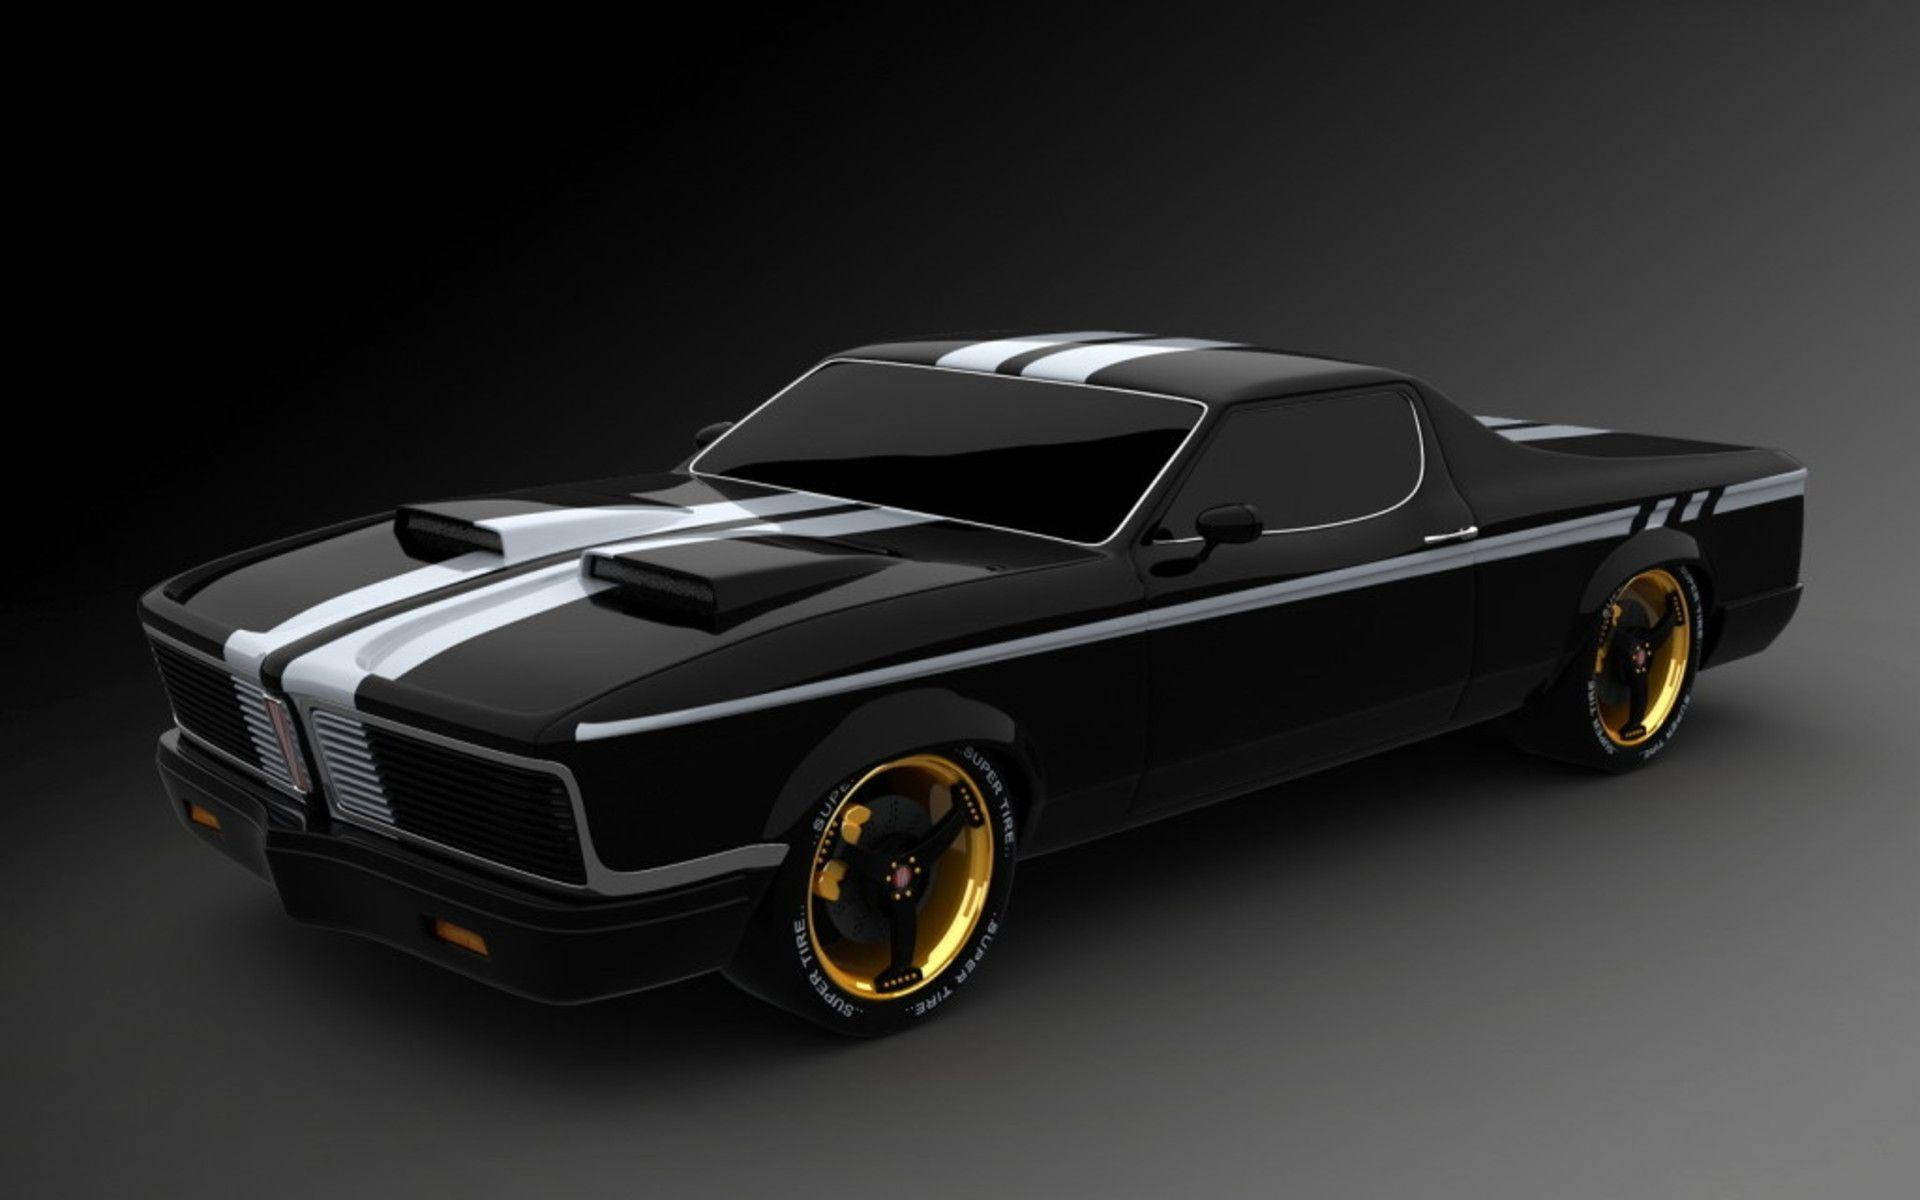 Pontiacgto Muscle Car Would Be Translated To 